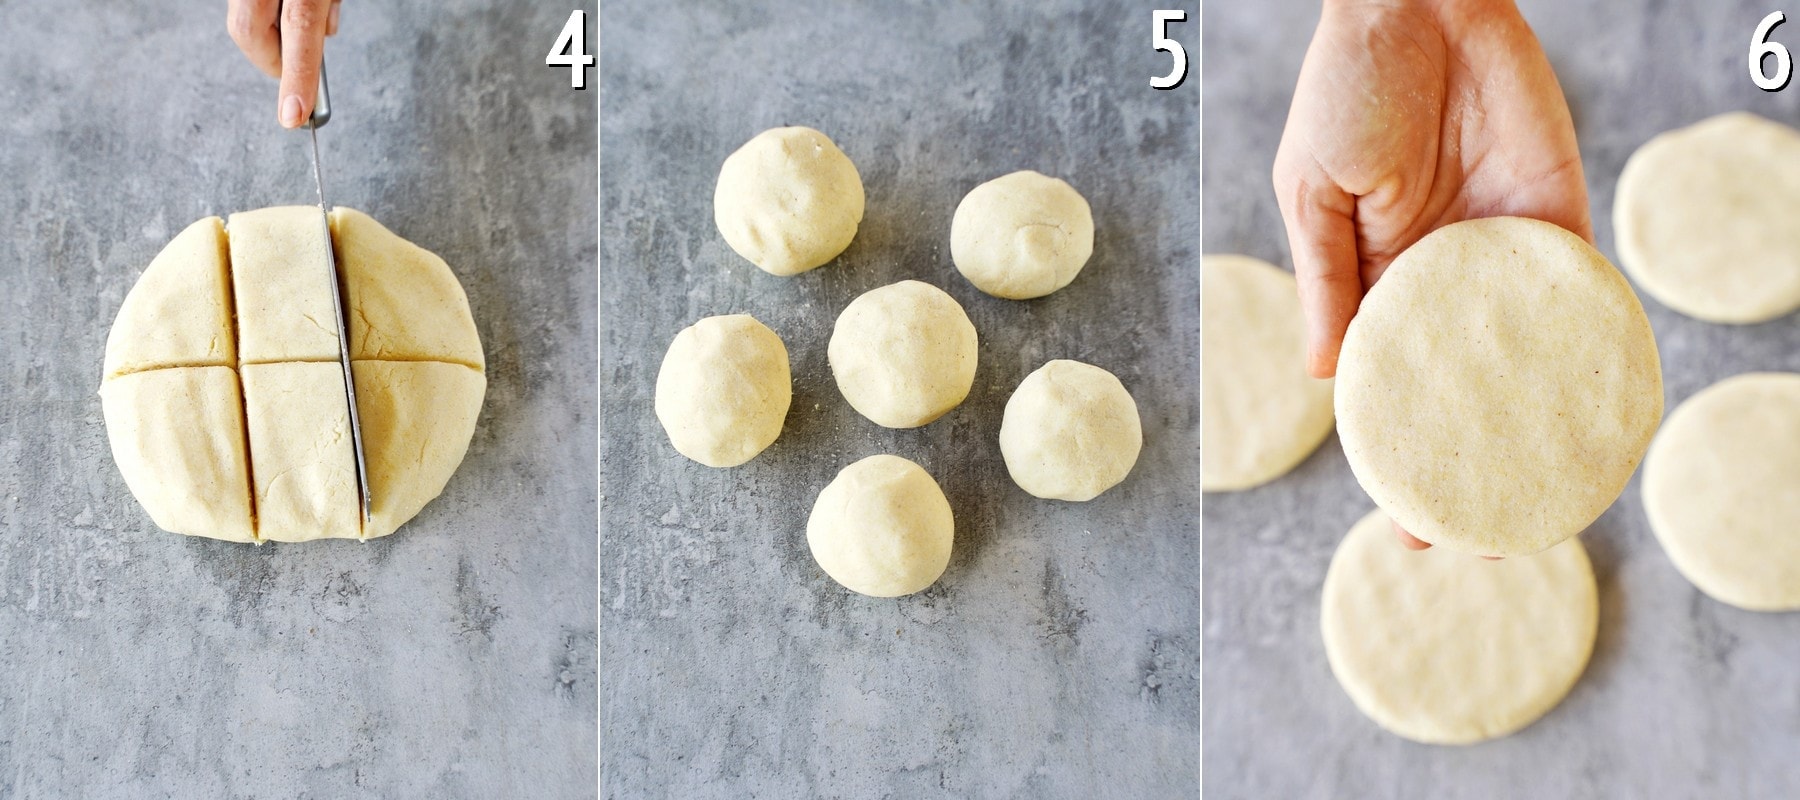 3 pics showing how to form arepa dough